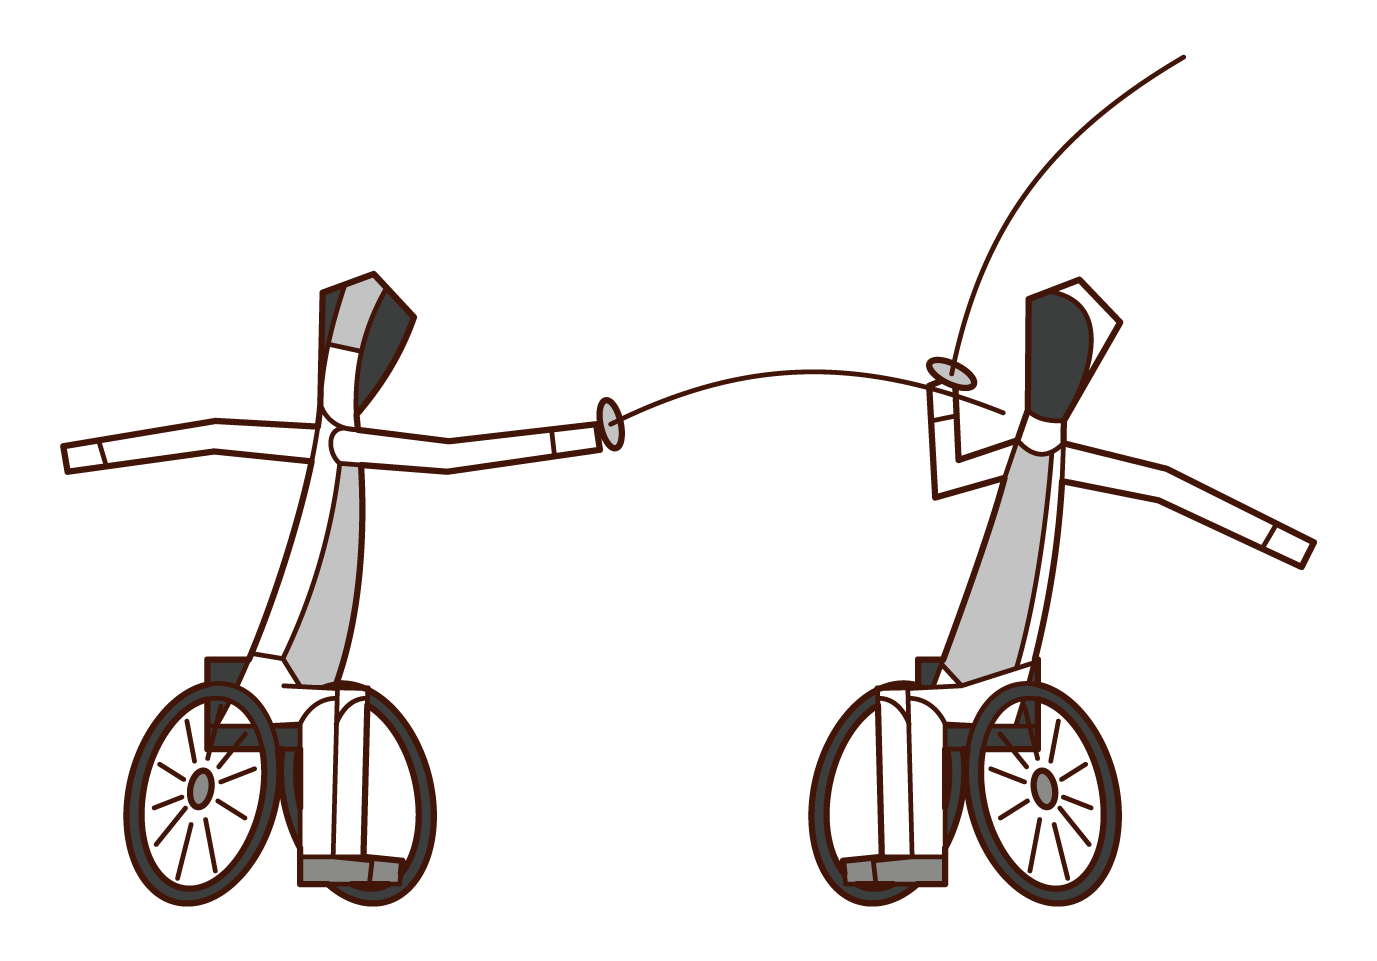 Illustration of a wheelchair fencing player playing a game